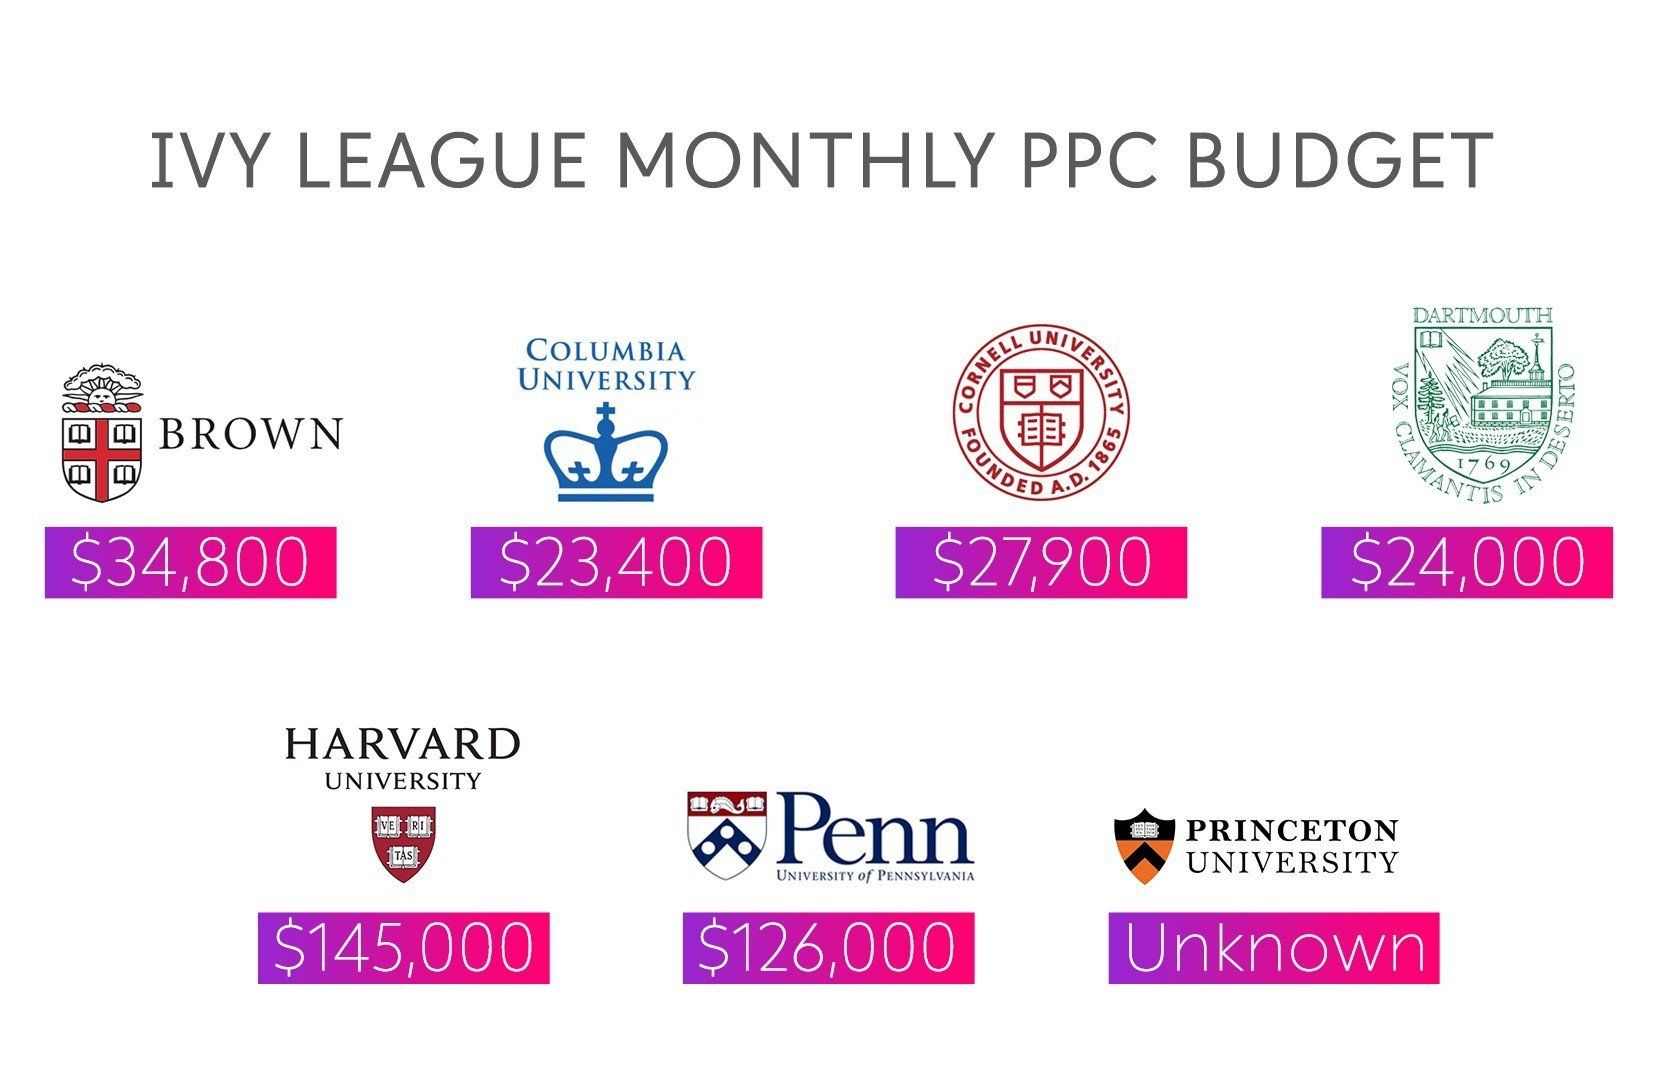 Monthly PPC budget Ivy Leaue